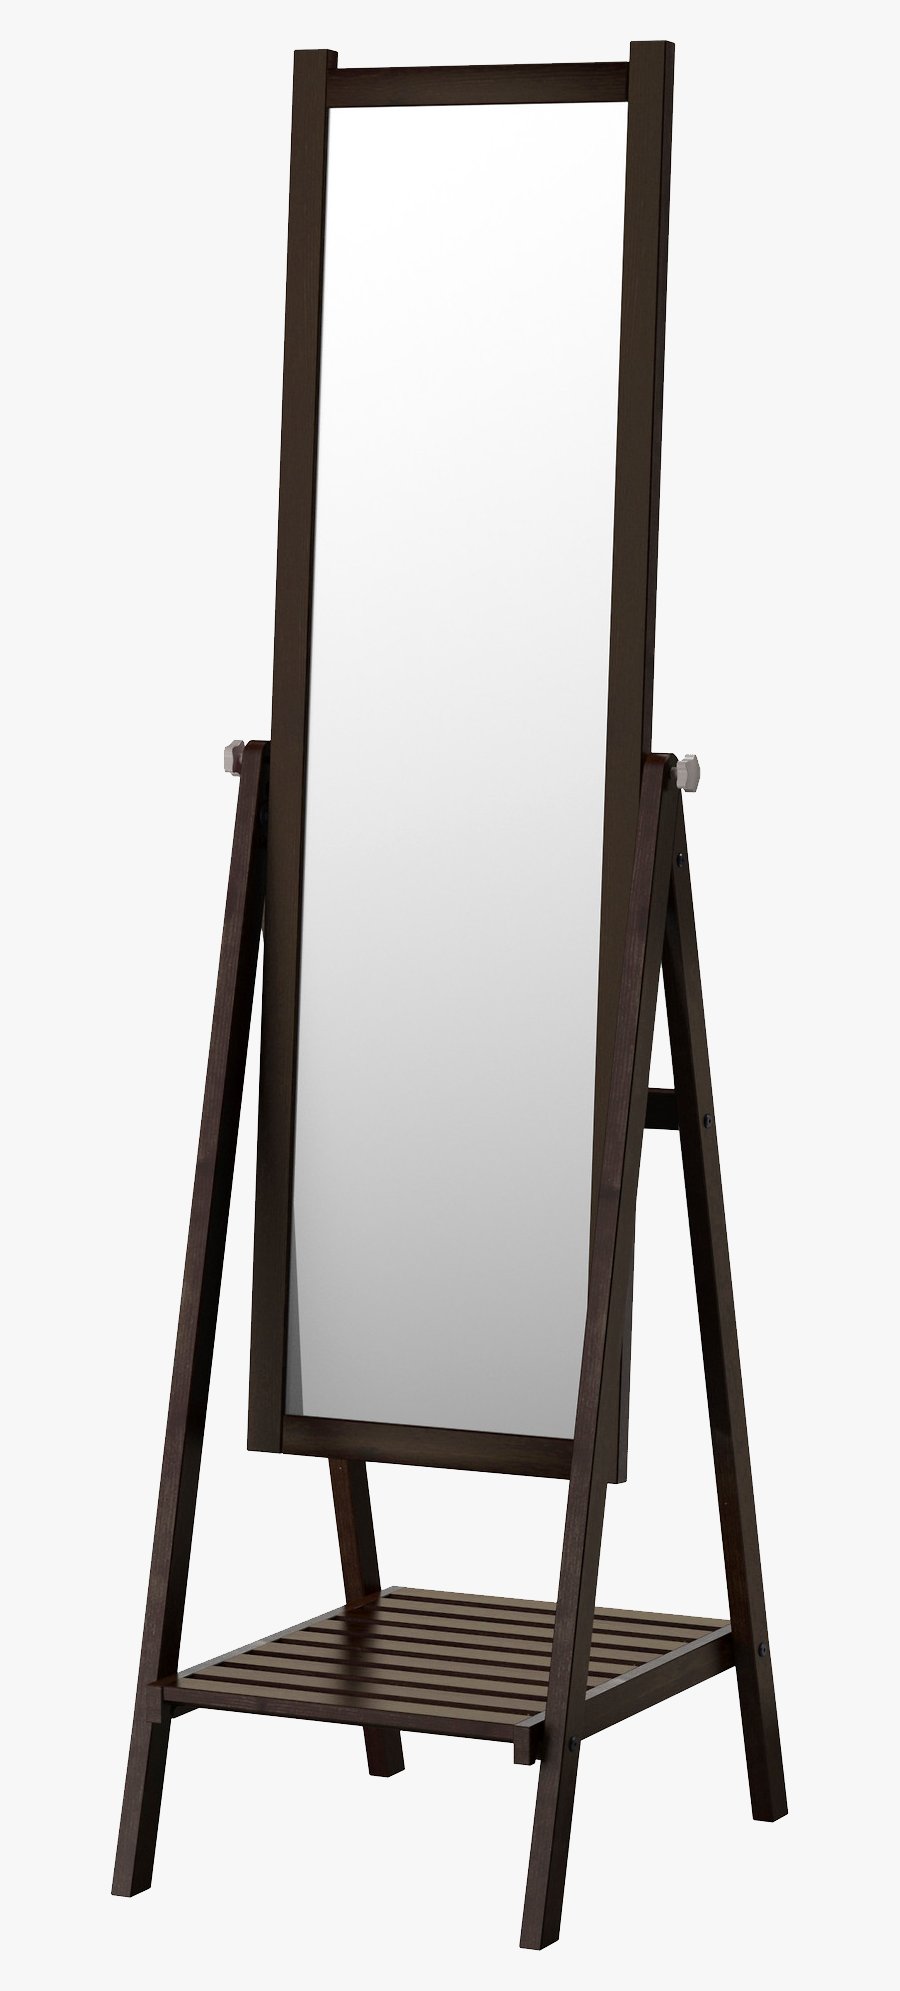 Mirror Png Photo - Standing Transparent Mirror Png, Transparent Clipart